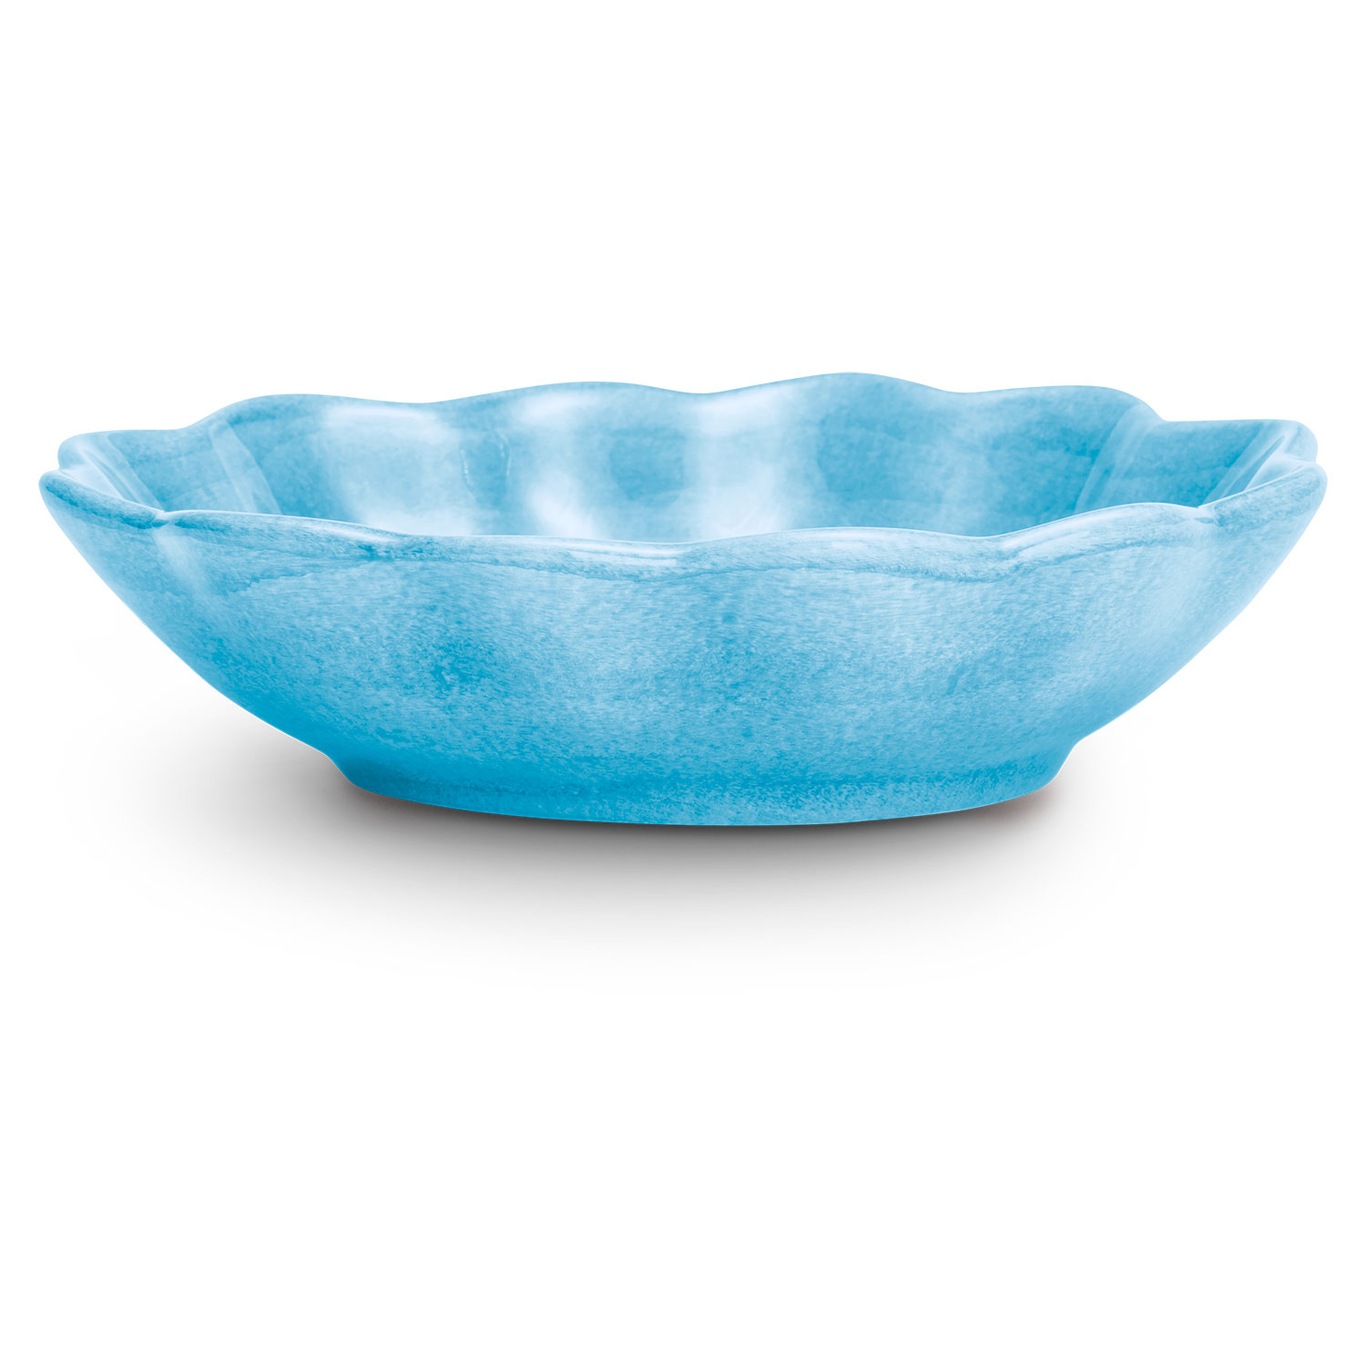 Oyster Bowl 16x18 cm, Turquoise